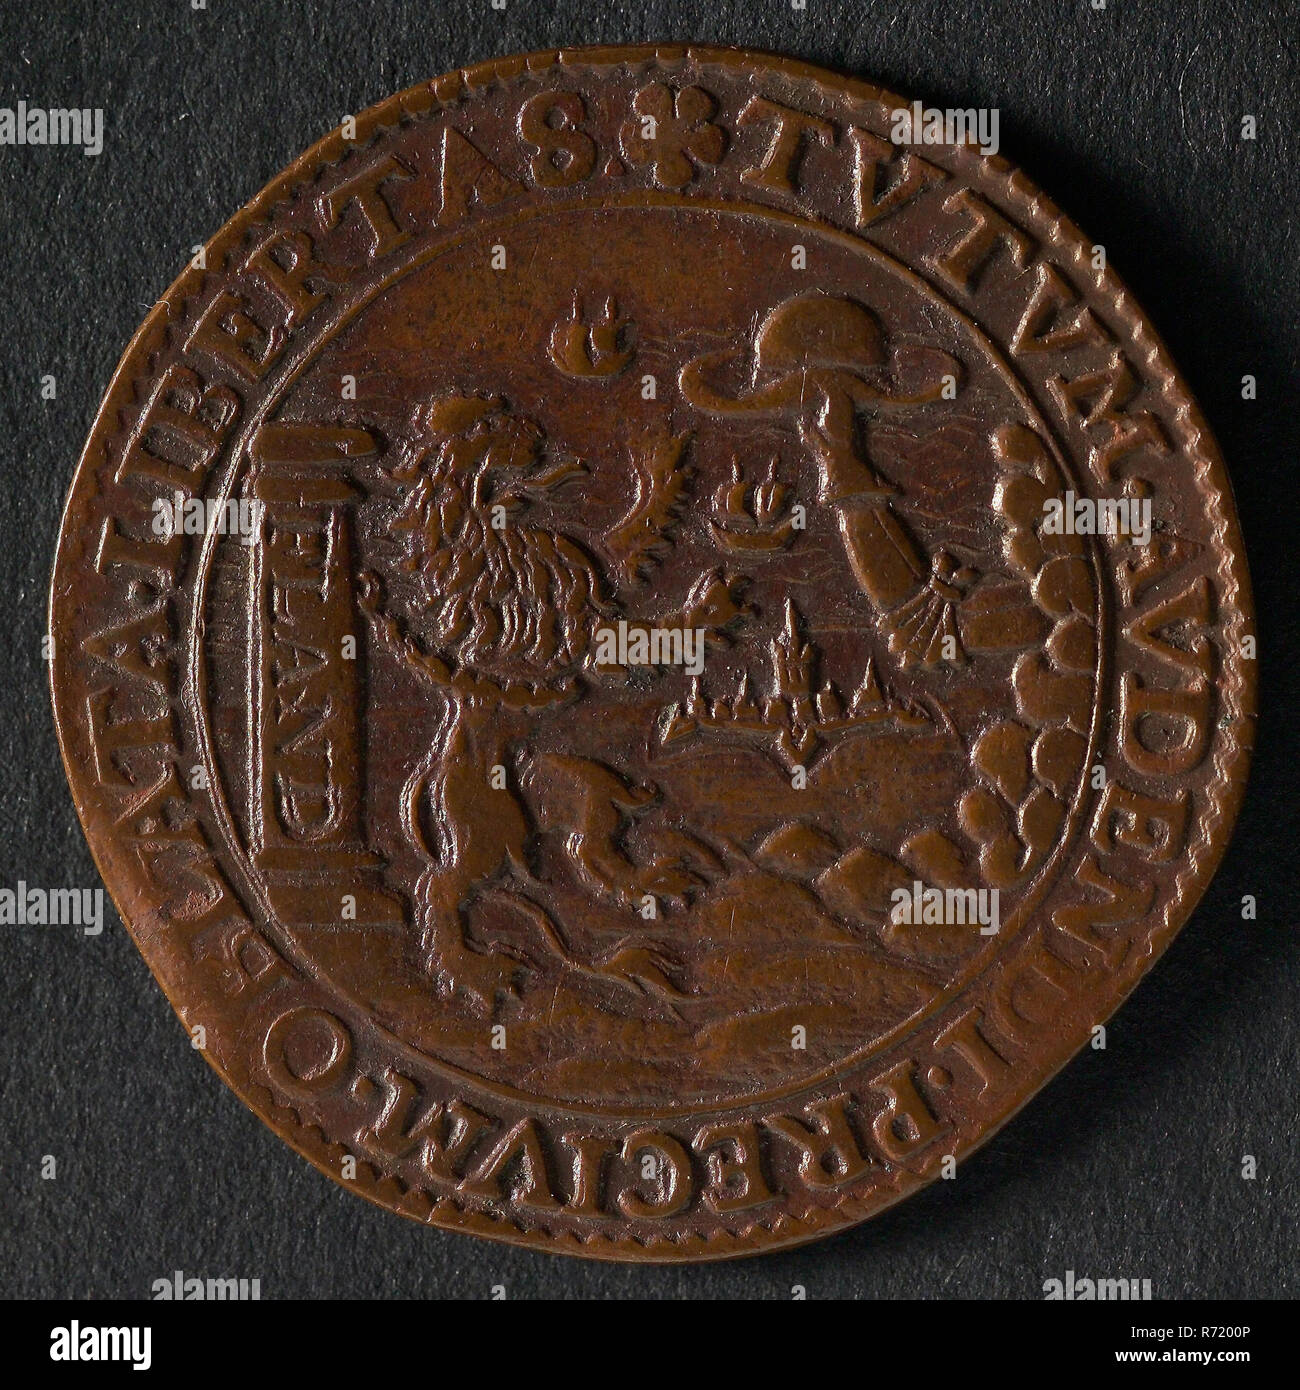 Medal on the peace proposals and the battle at Nieuwpoort, jeton utility medal medal exchange buyer, Flemish lion bound to column on which FLAND refuses to offer him freedom hat omschrift: TVTVM. AVDENDI. PRECIVM. OBLATA. LIBERTAS (the offered freedom is safe reward to take the plunge) Oldenbarnevelt Stock Photo